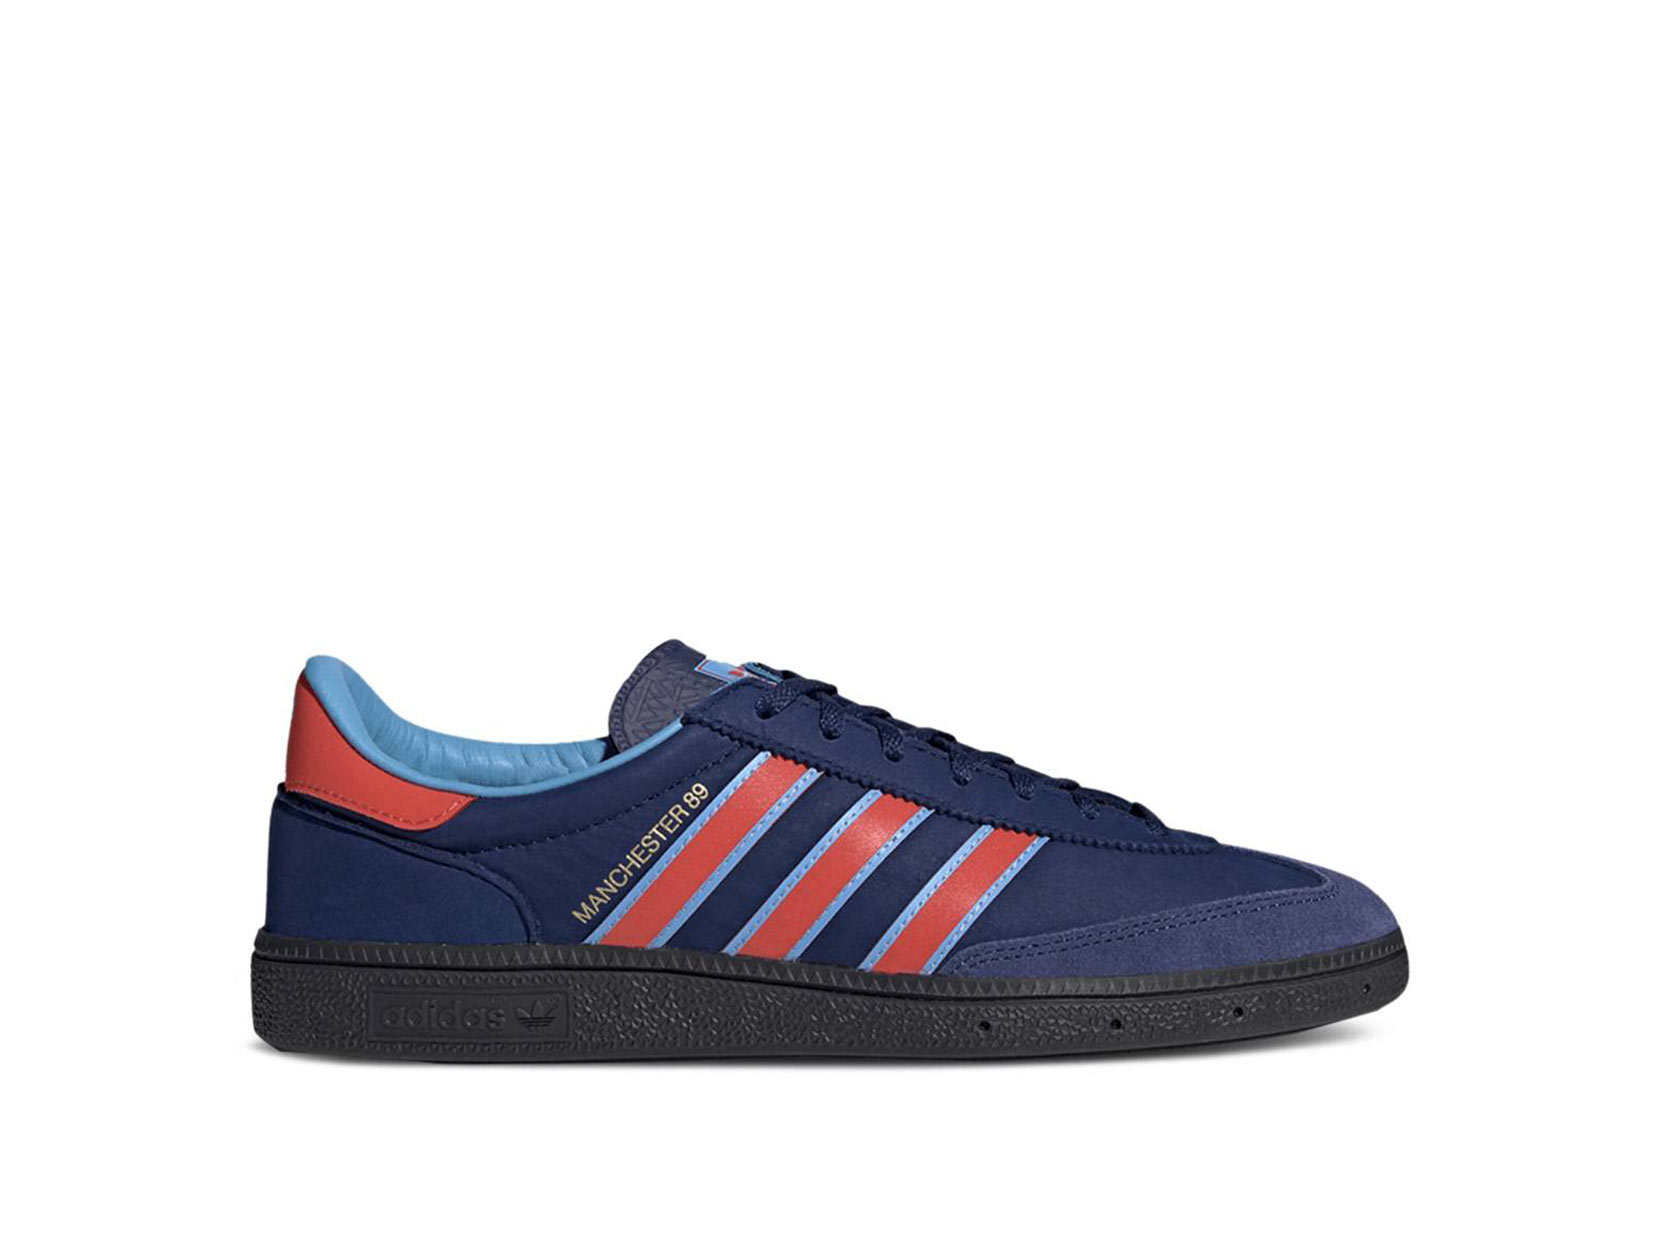 adidas manchester shoes